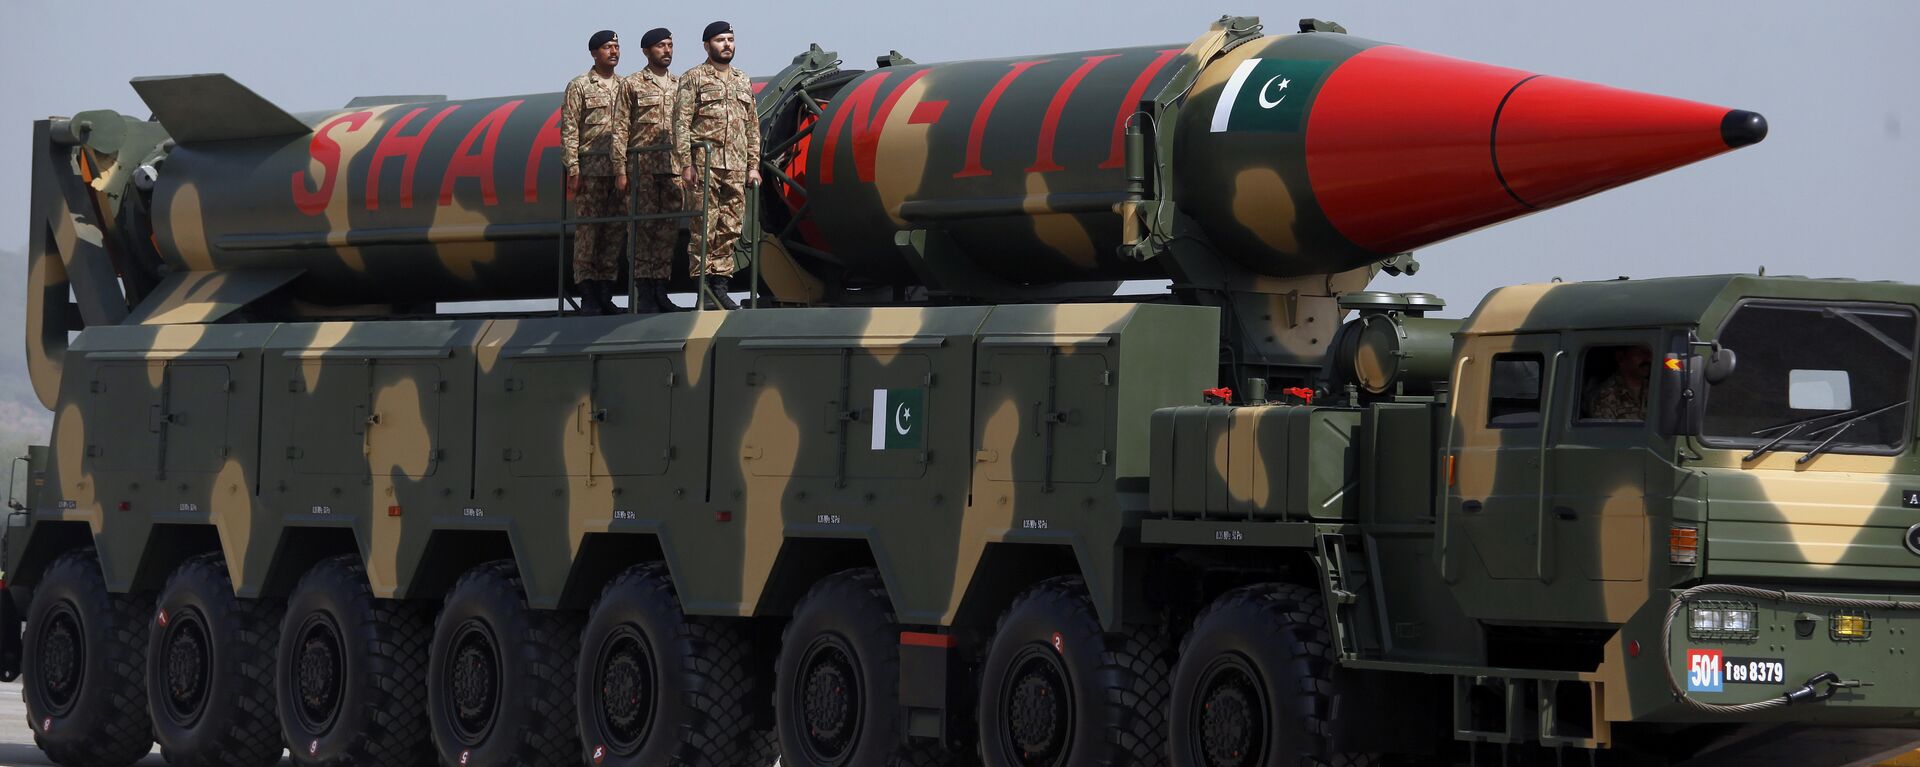 A Pakistani-made Shaheen-III missile, that is capable of carrying nuclear warheads, is on display during a military parade in Islamabad, Pakistan, Friday, March 23, 2018 - Sputnik International, 1920, 28.08.2021